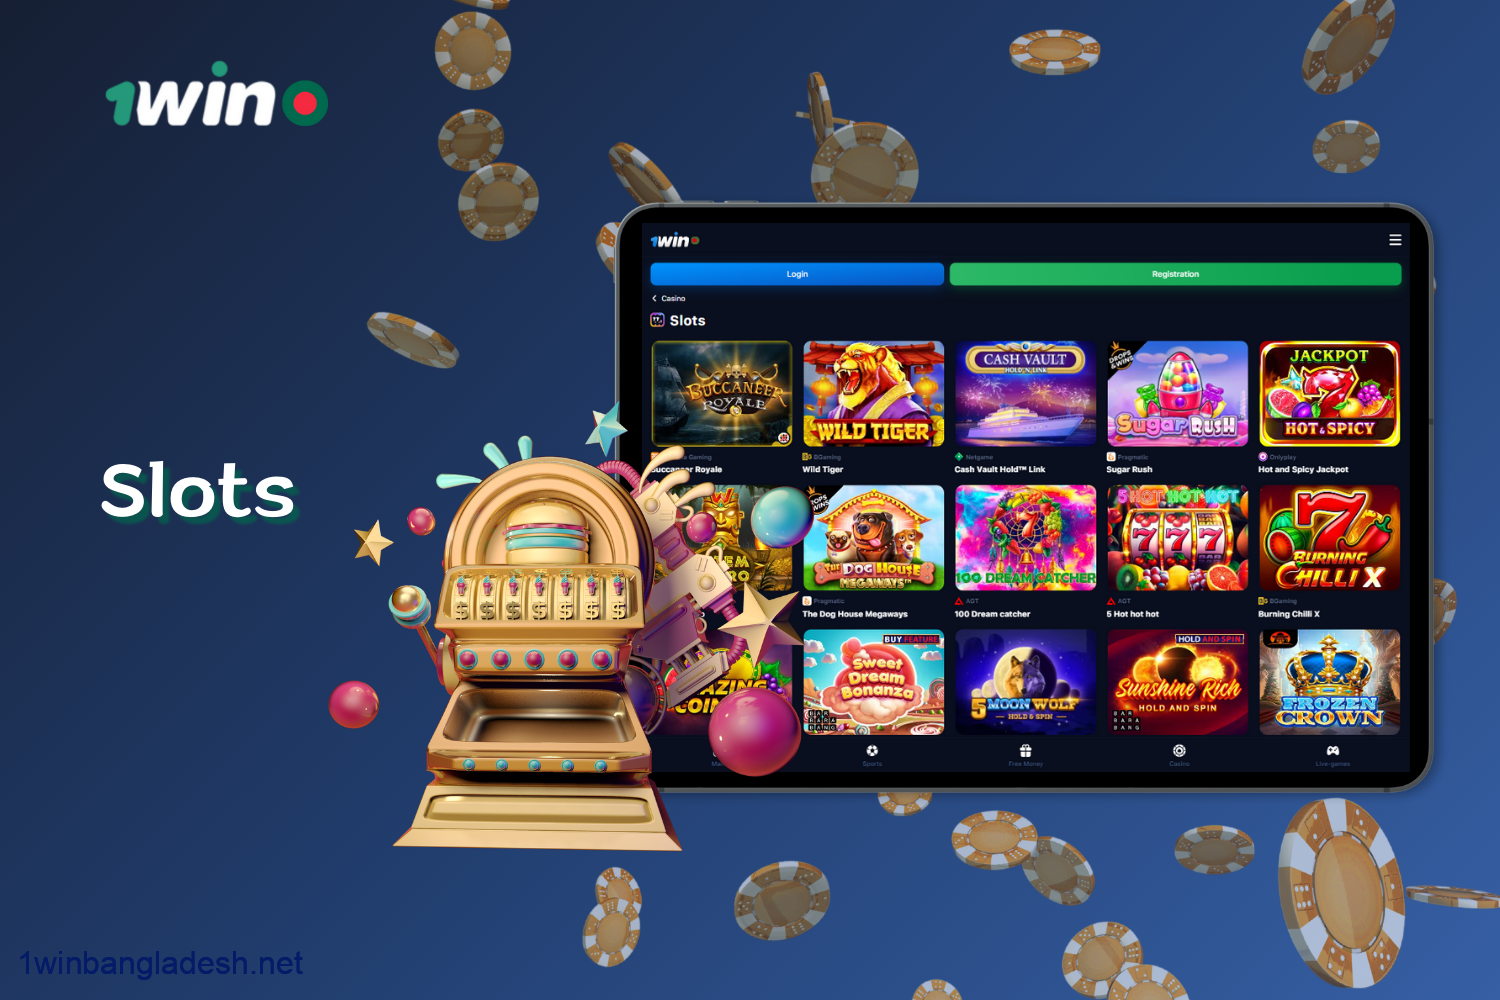 On 1vin website, players from Bangladesh are offered a wide range of slots in the Casino section